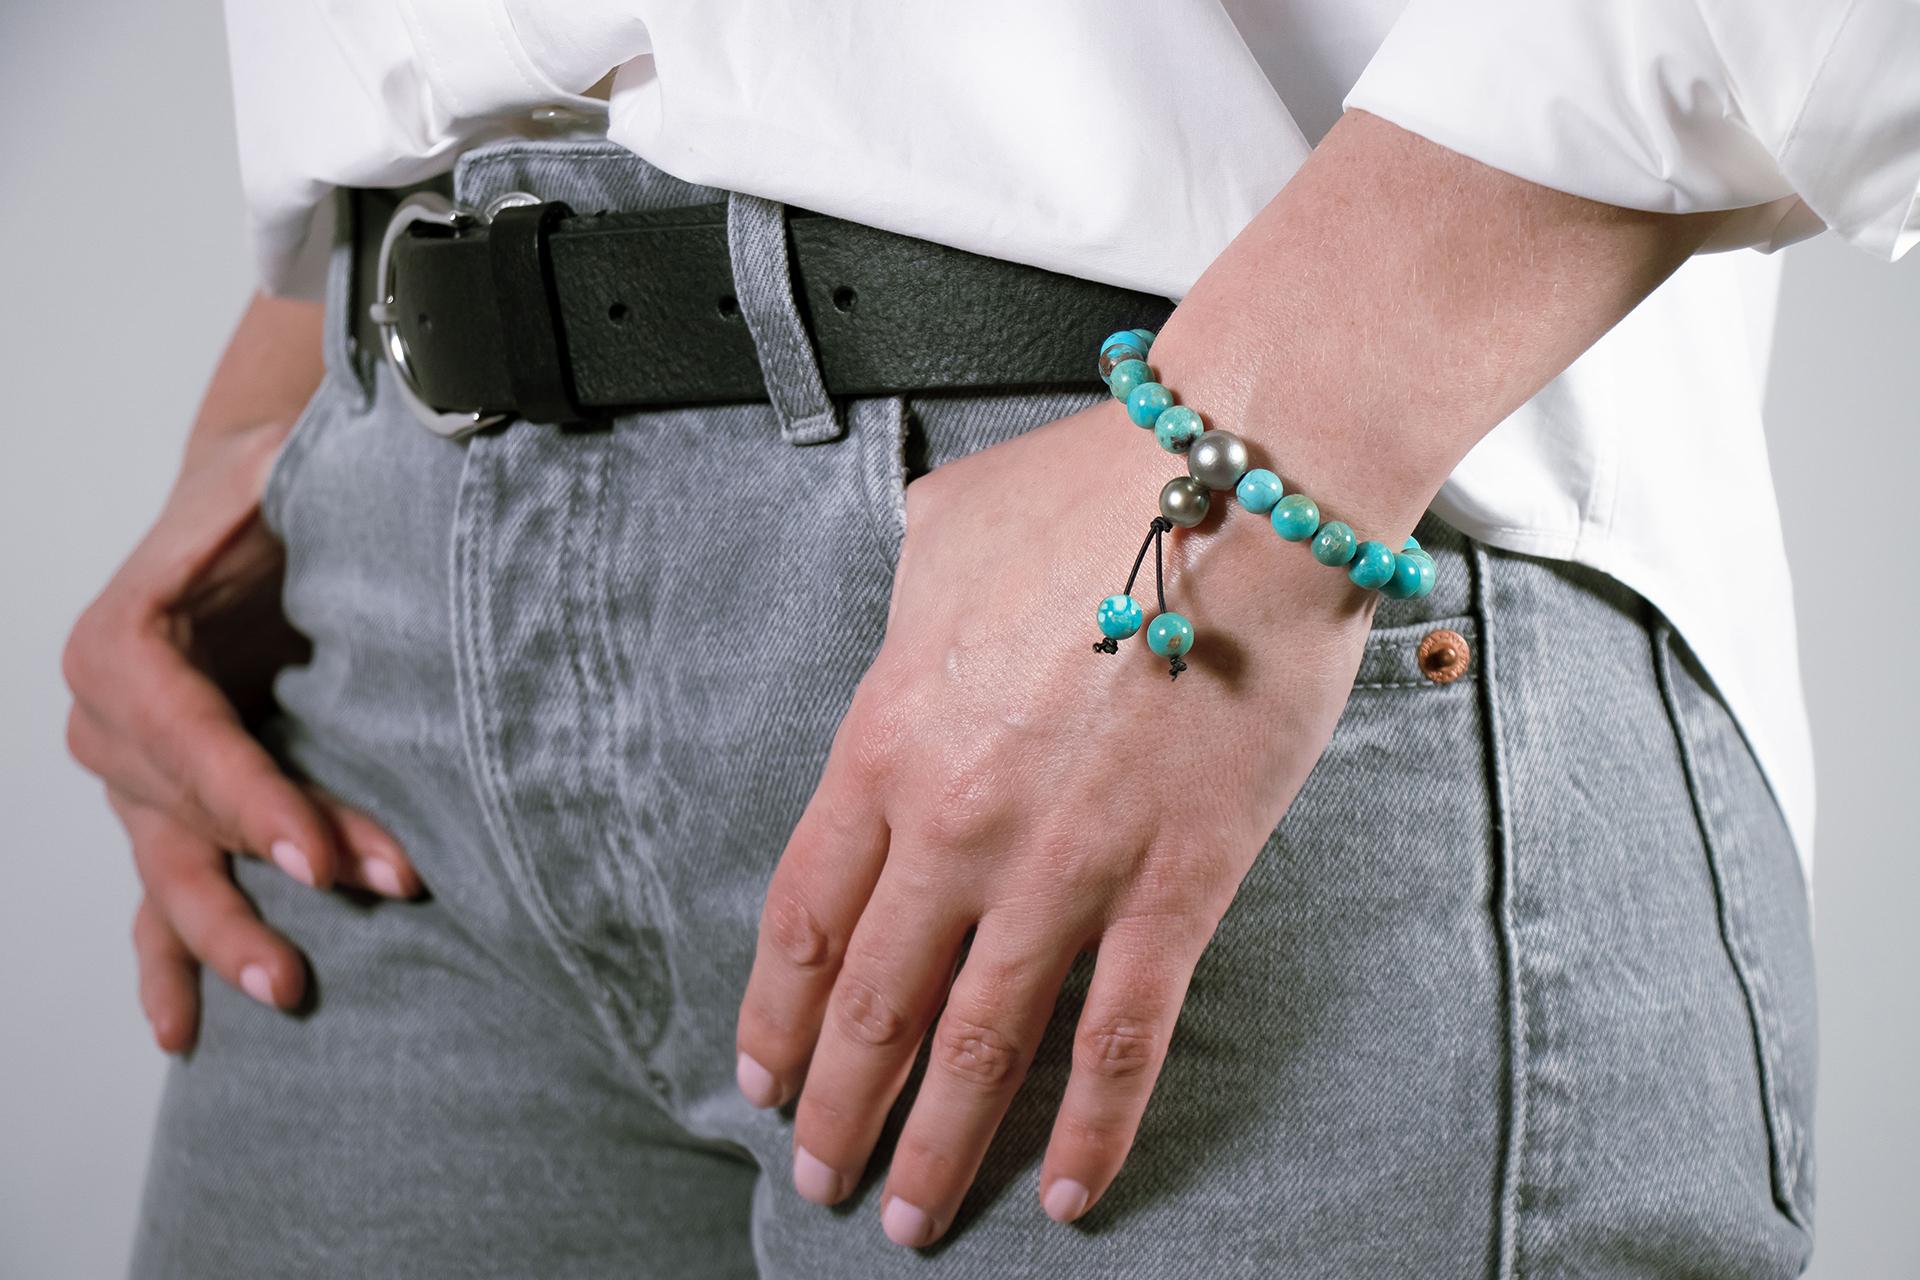 This bracelet is made of  6mm untreated turquoise beads and 2 grey Tahiti pearls, beaded on a high quality elastic that easily glides over your wrist. 